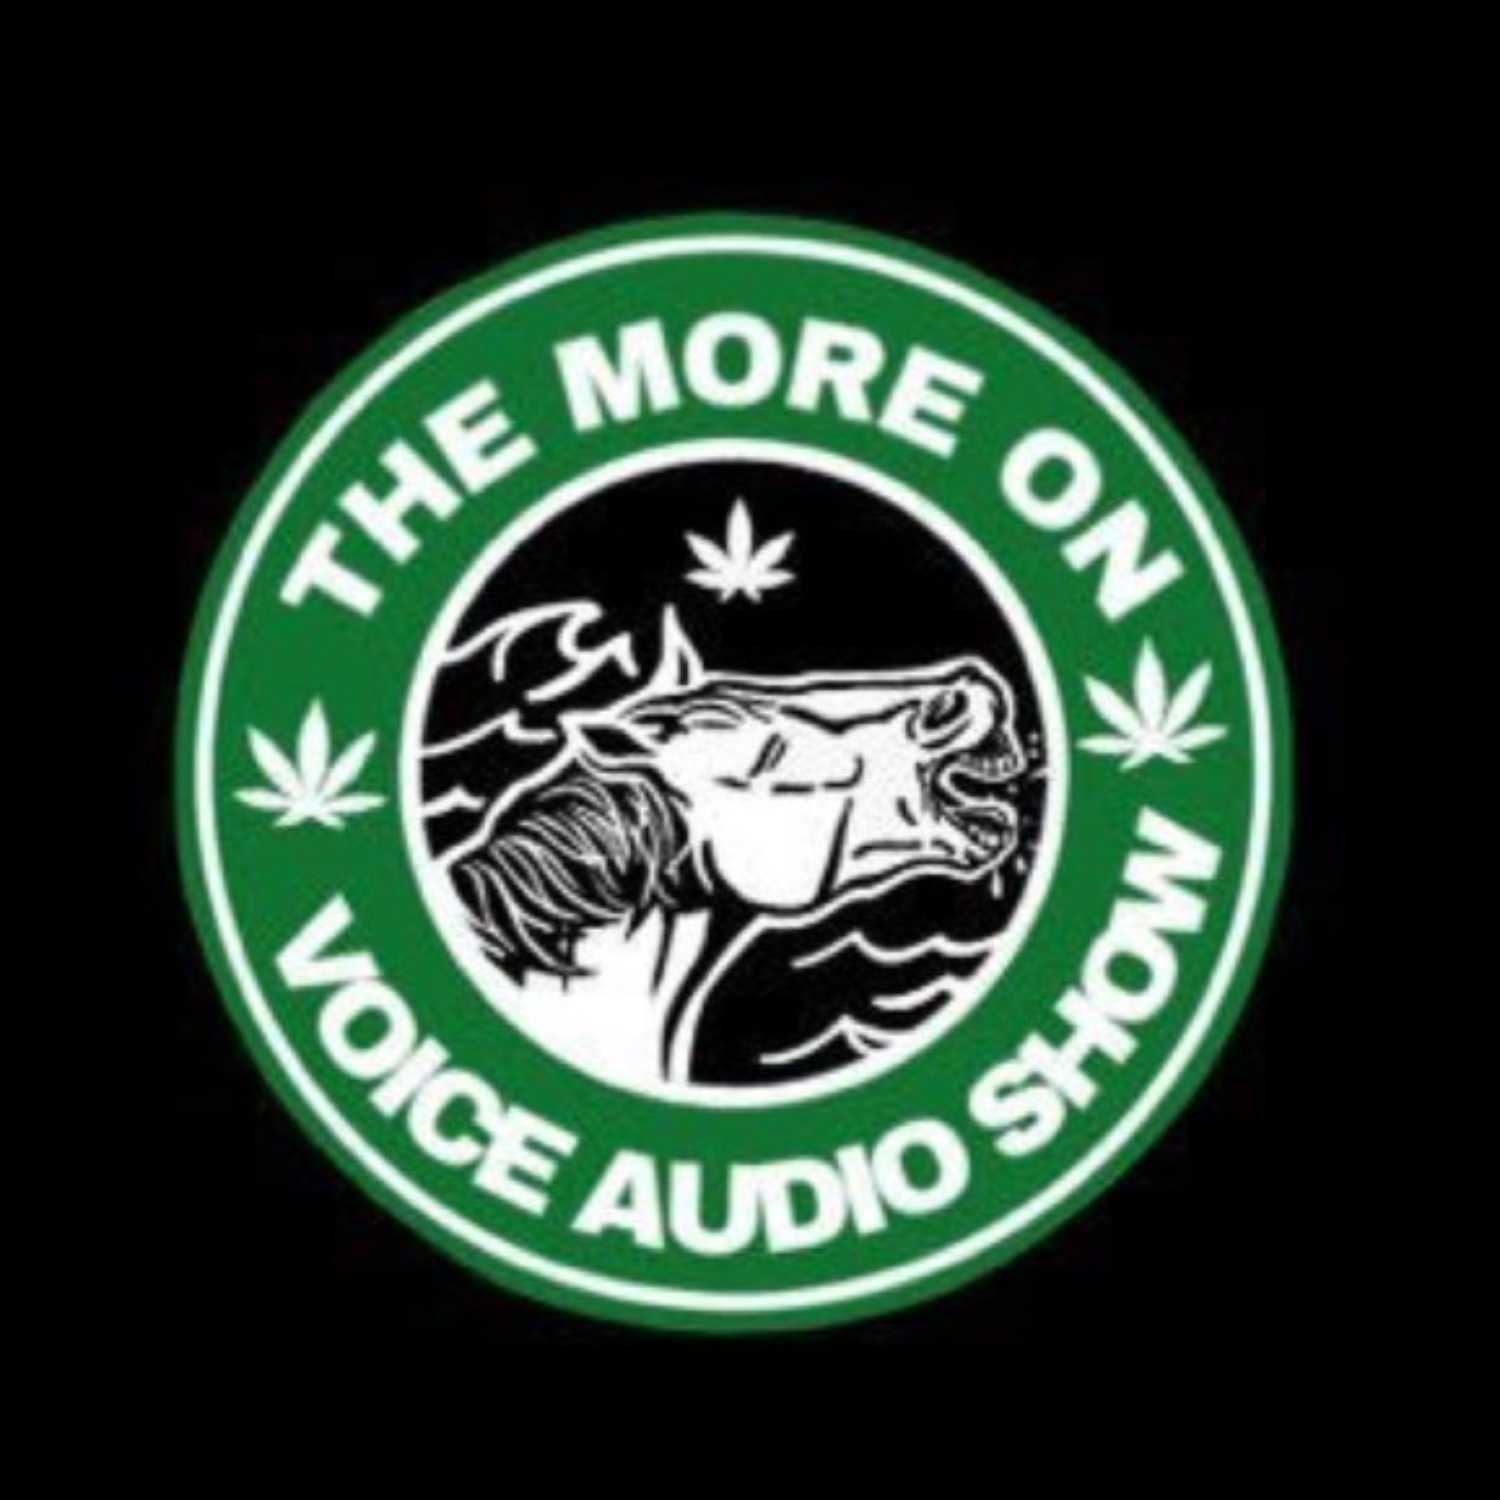 The More On Voice Audio Show: Episode 39